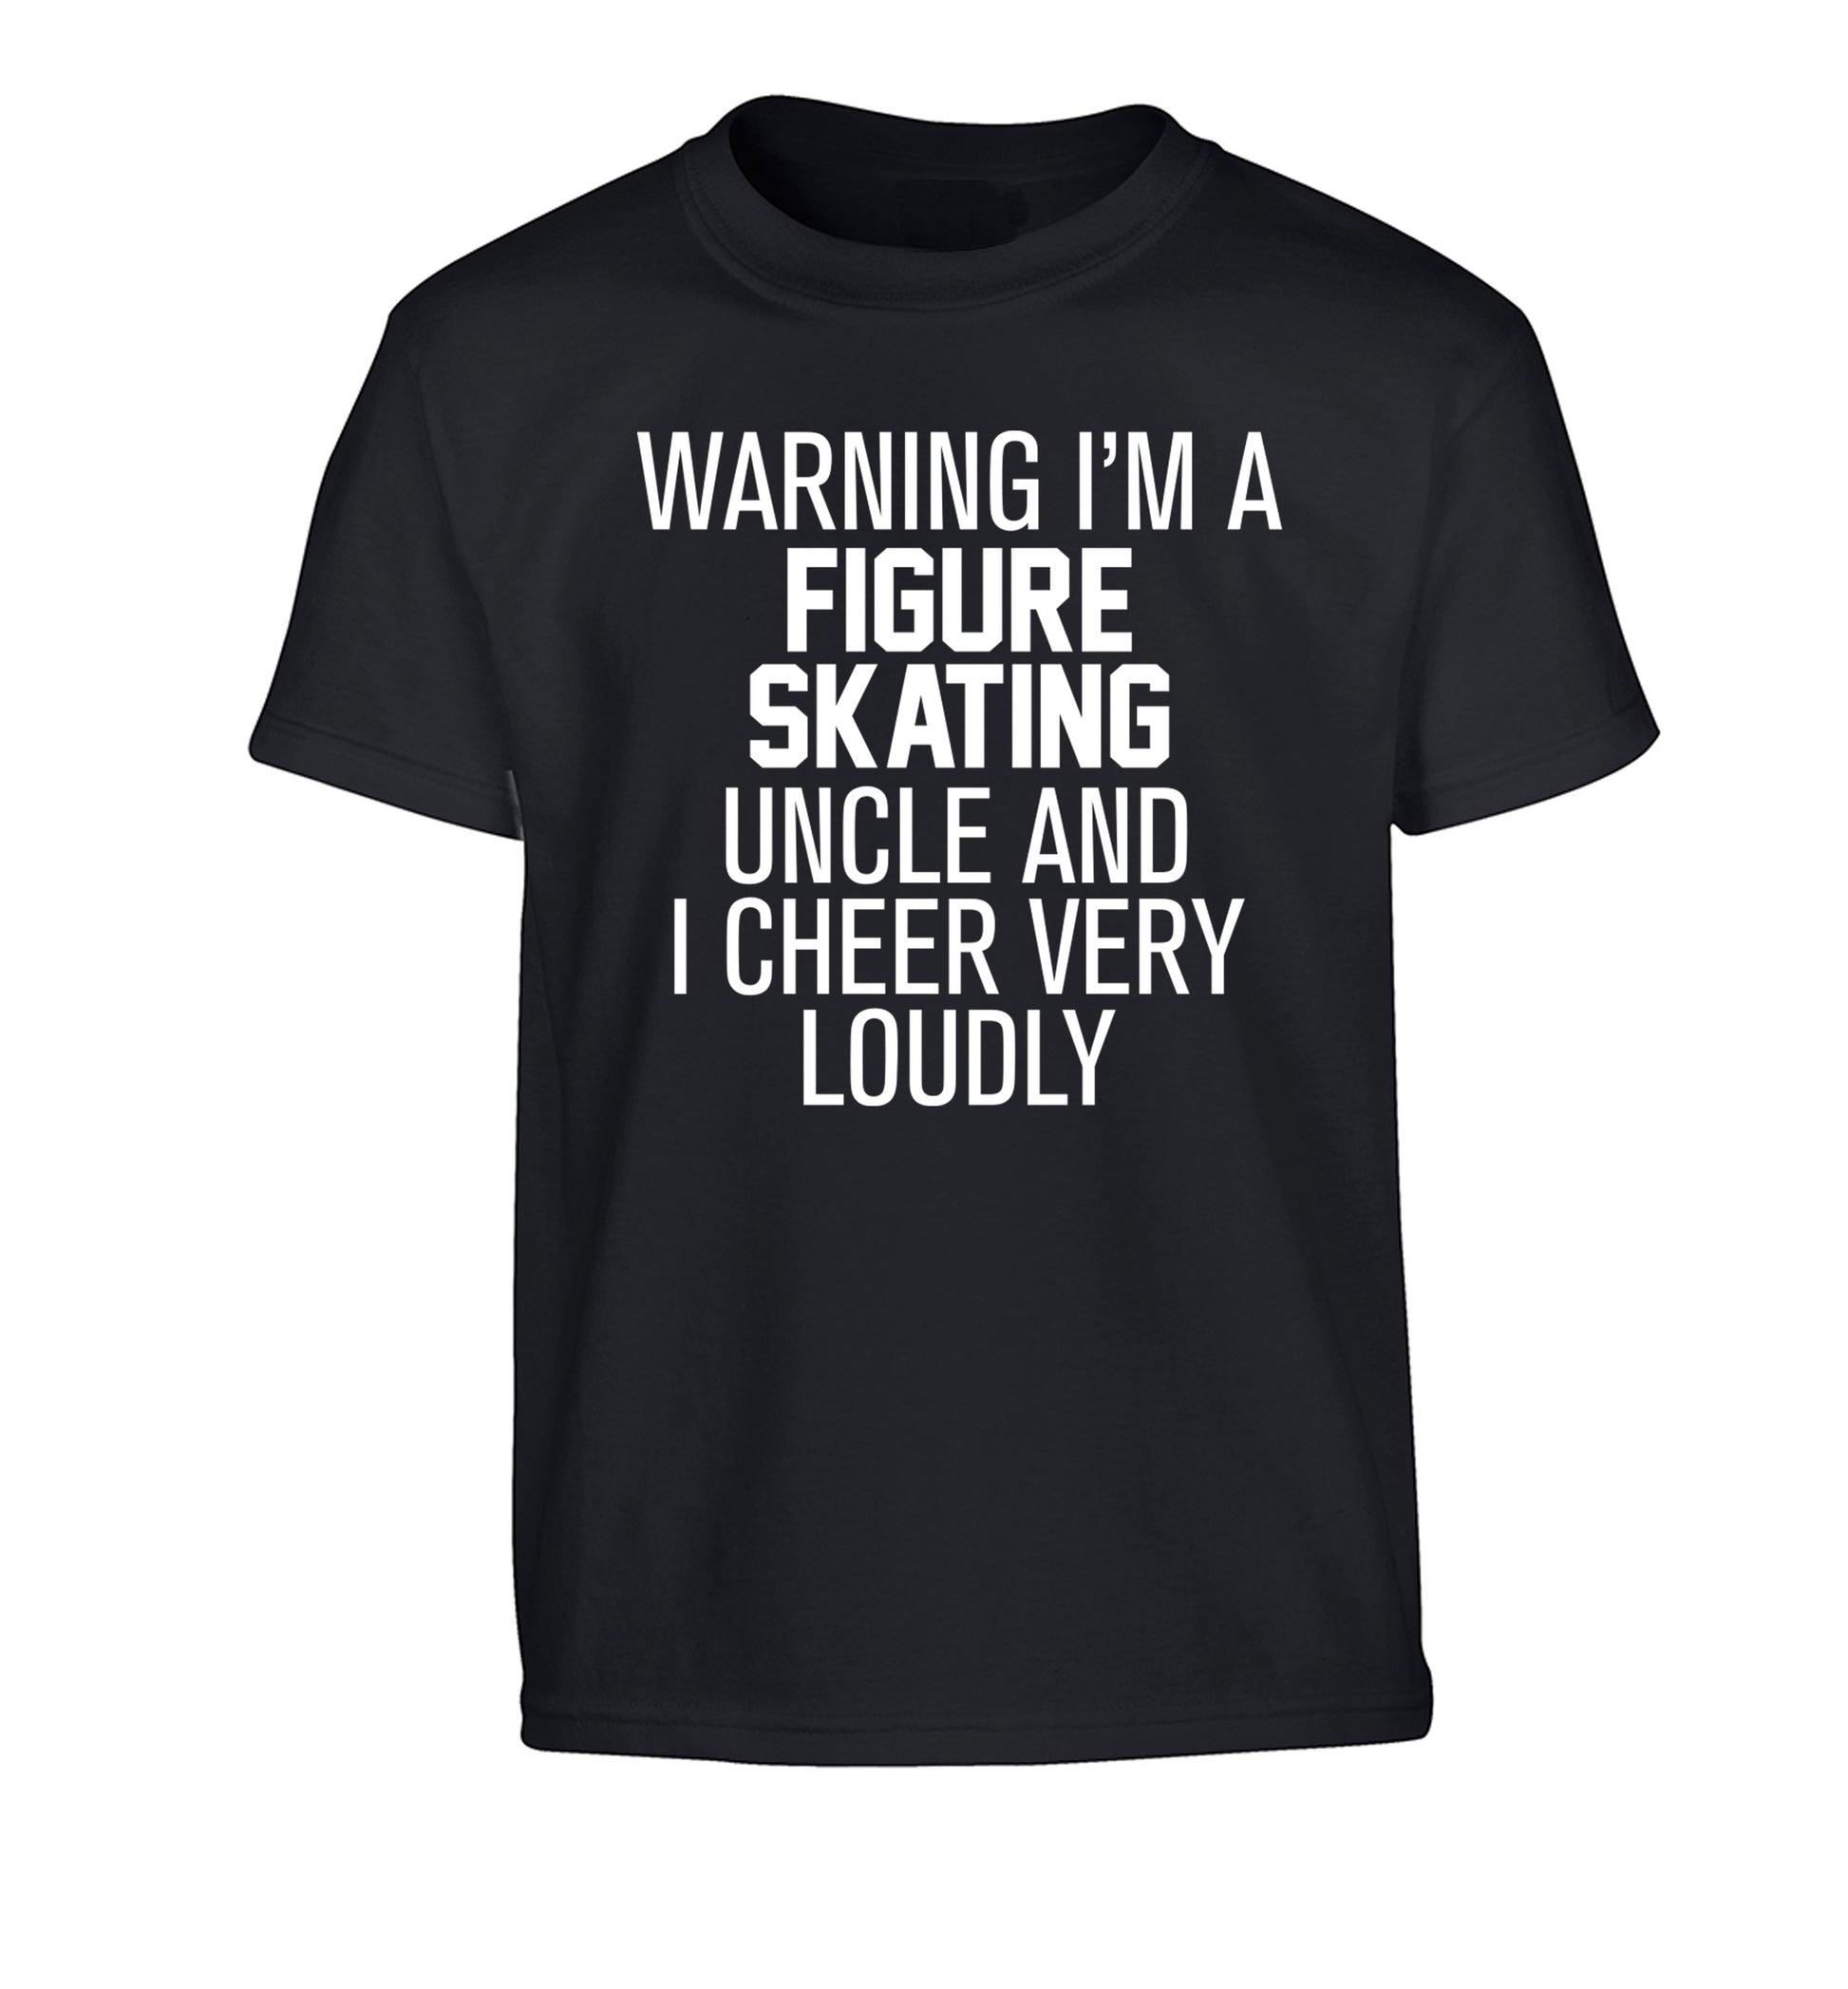 Warning I'm a figure skating uncle and I cheer very loudly Children's black Tshirt 12-14 Years